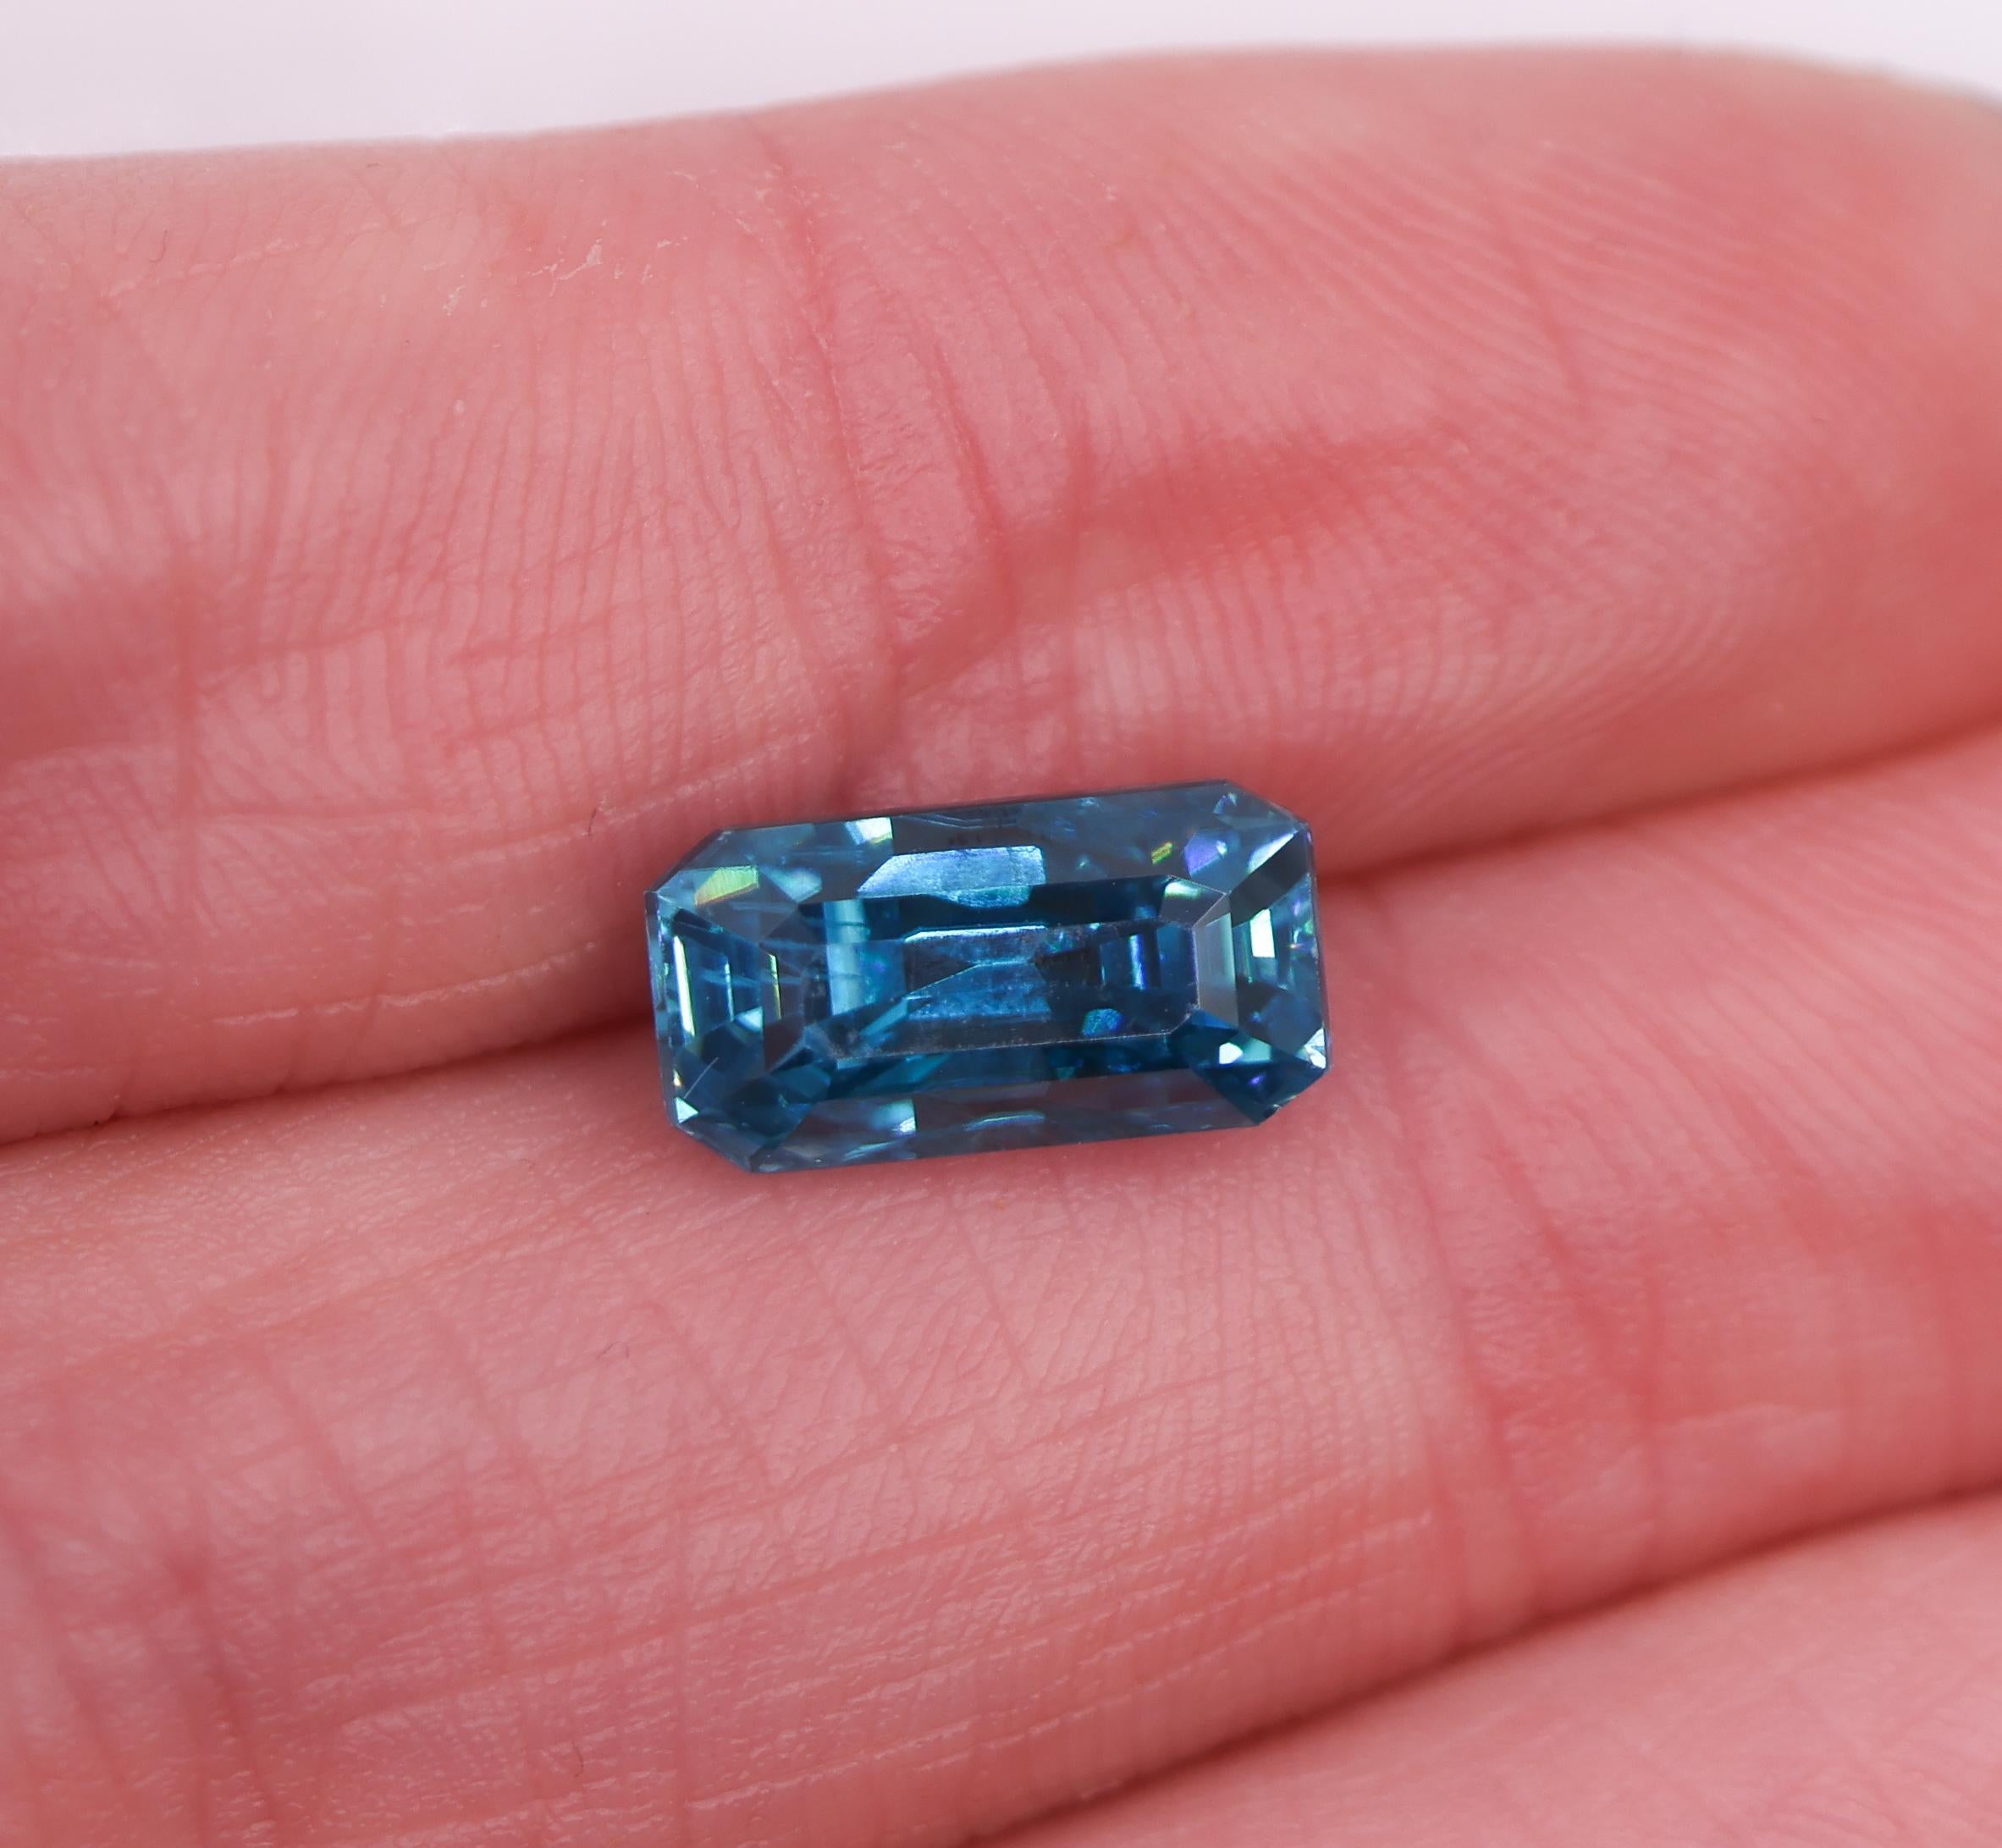 A gorgeous emerald cut blue zircon looking for it's next home. If you feel a sparkle of excitement seeing this gem and want to design a one of a kind piece of jewelry, let us know!

Cambodian Zircon is the perfect eco-friendly alternative to